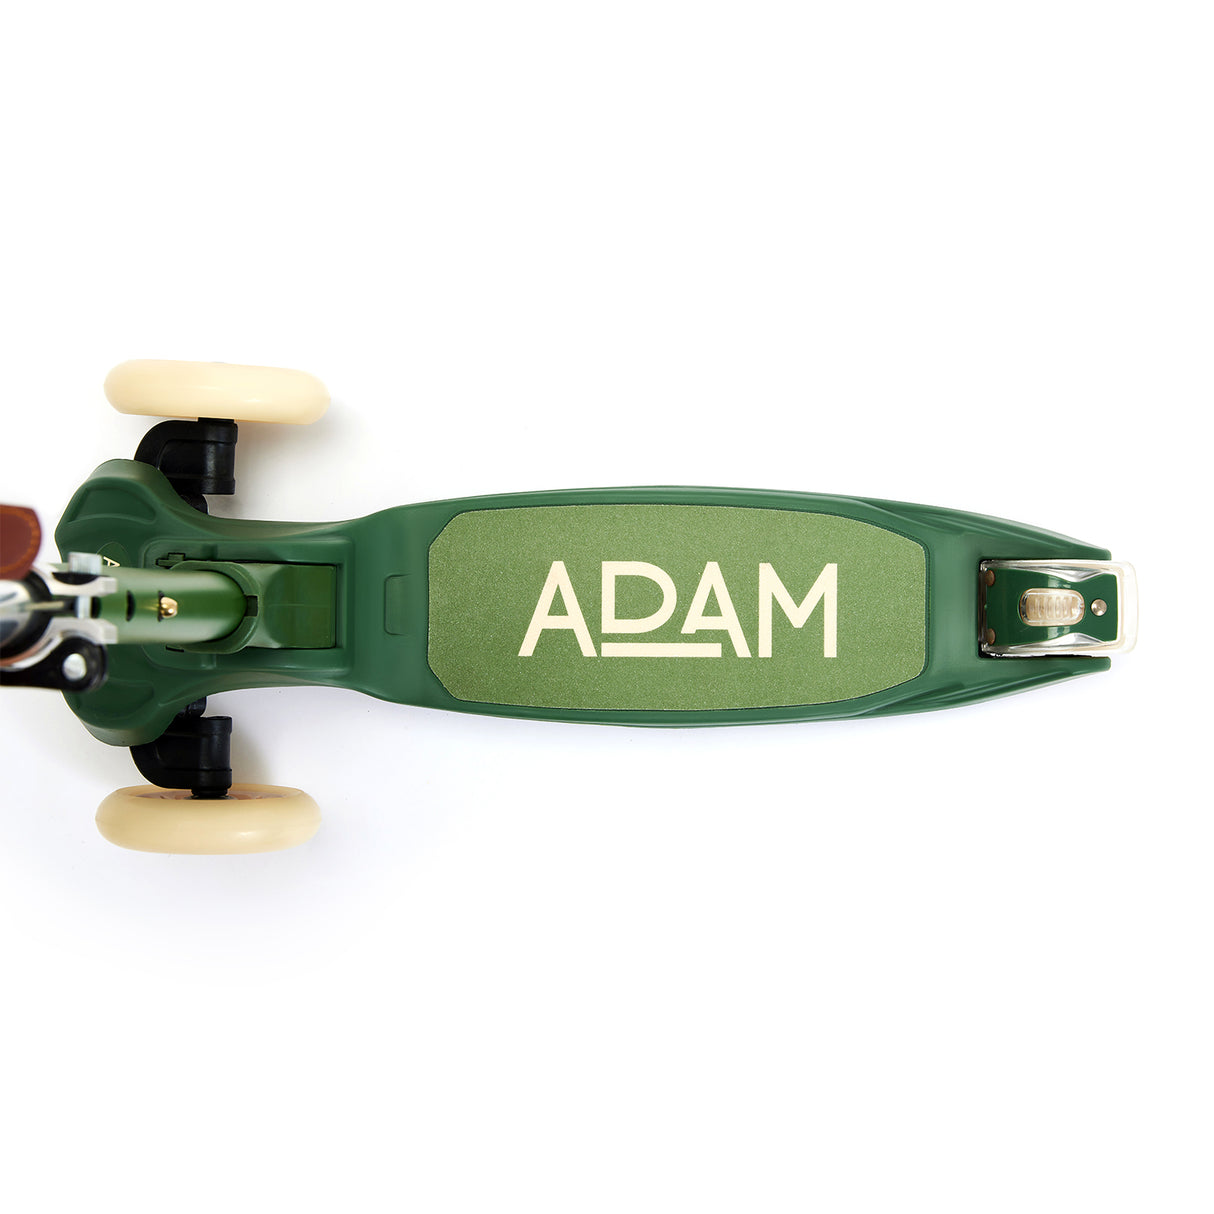 The Adam Scooter